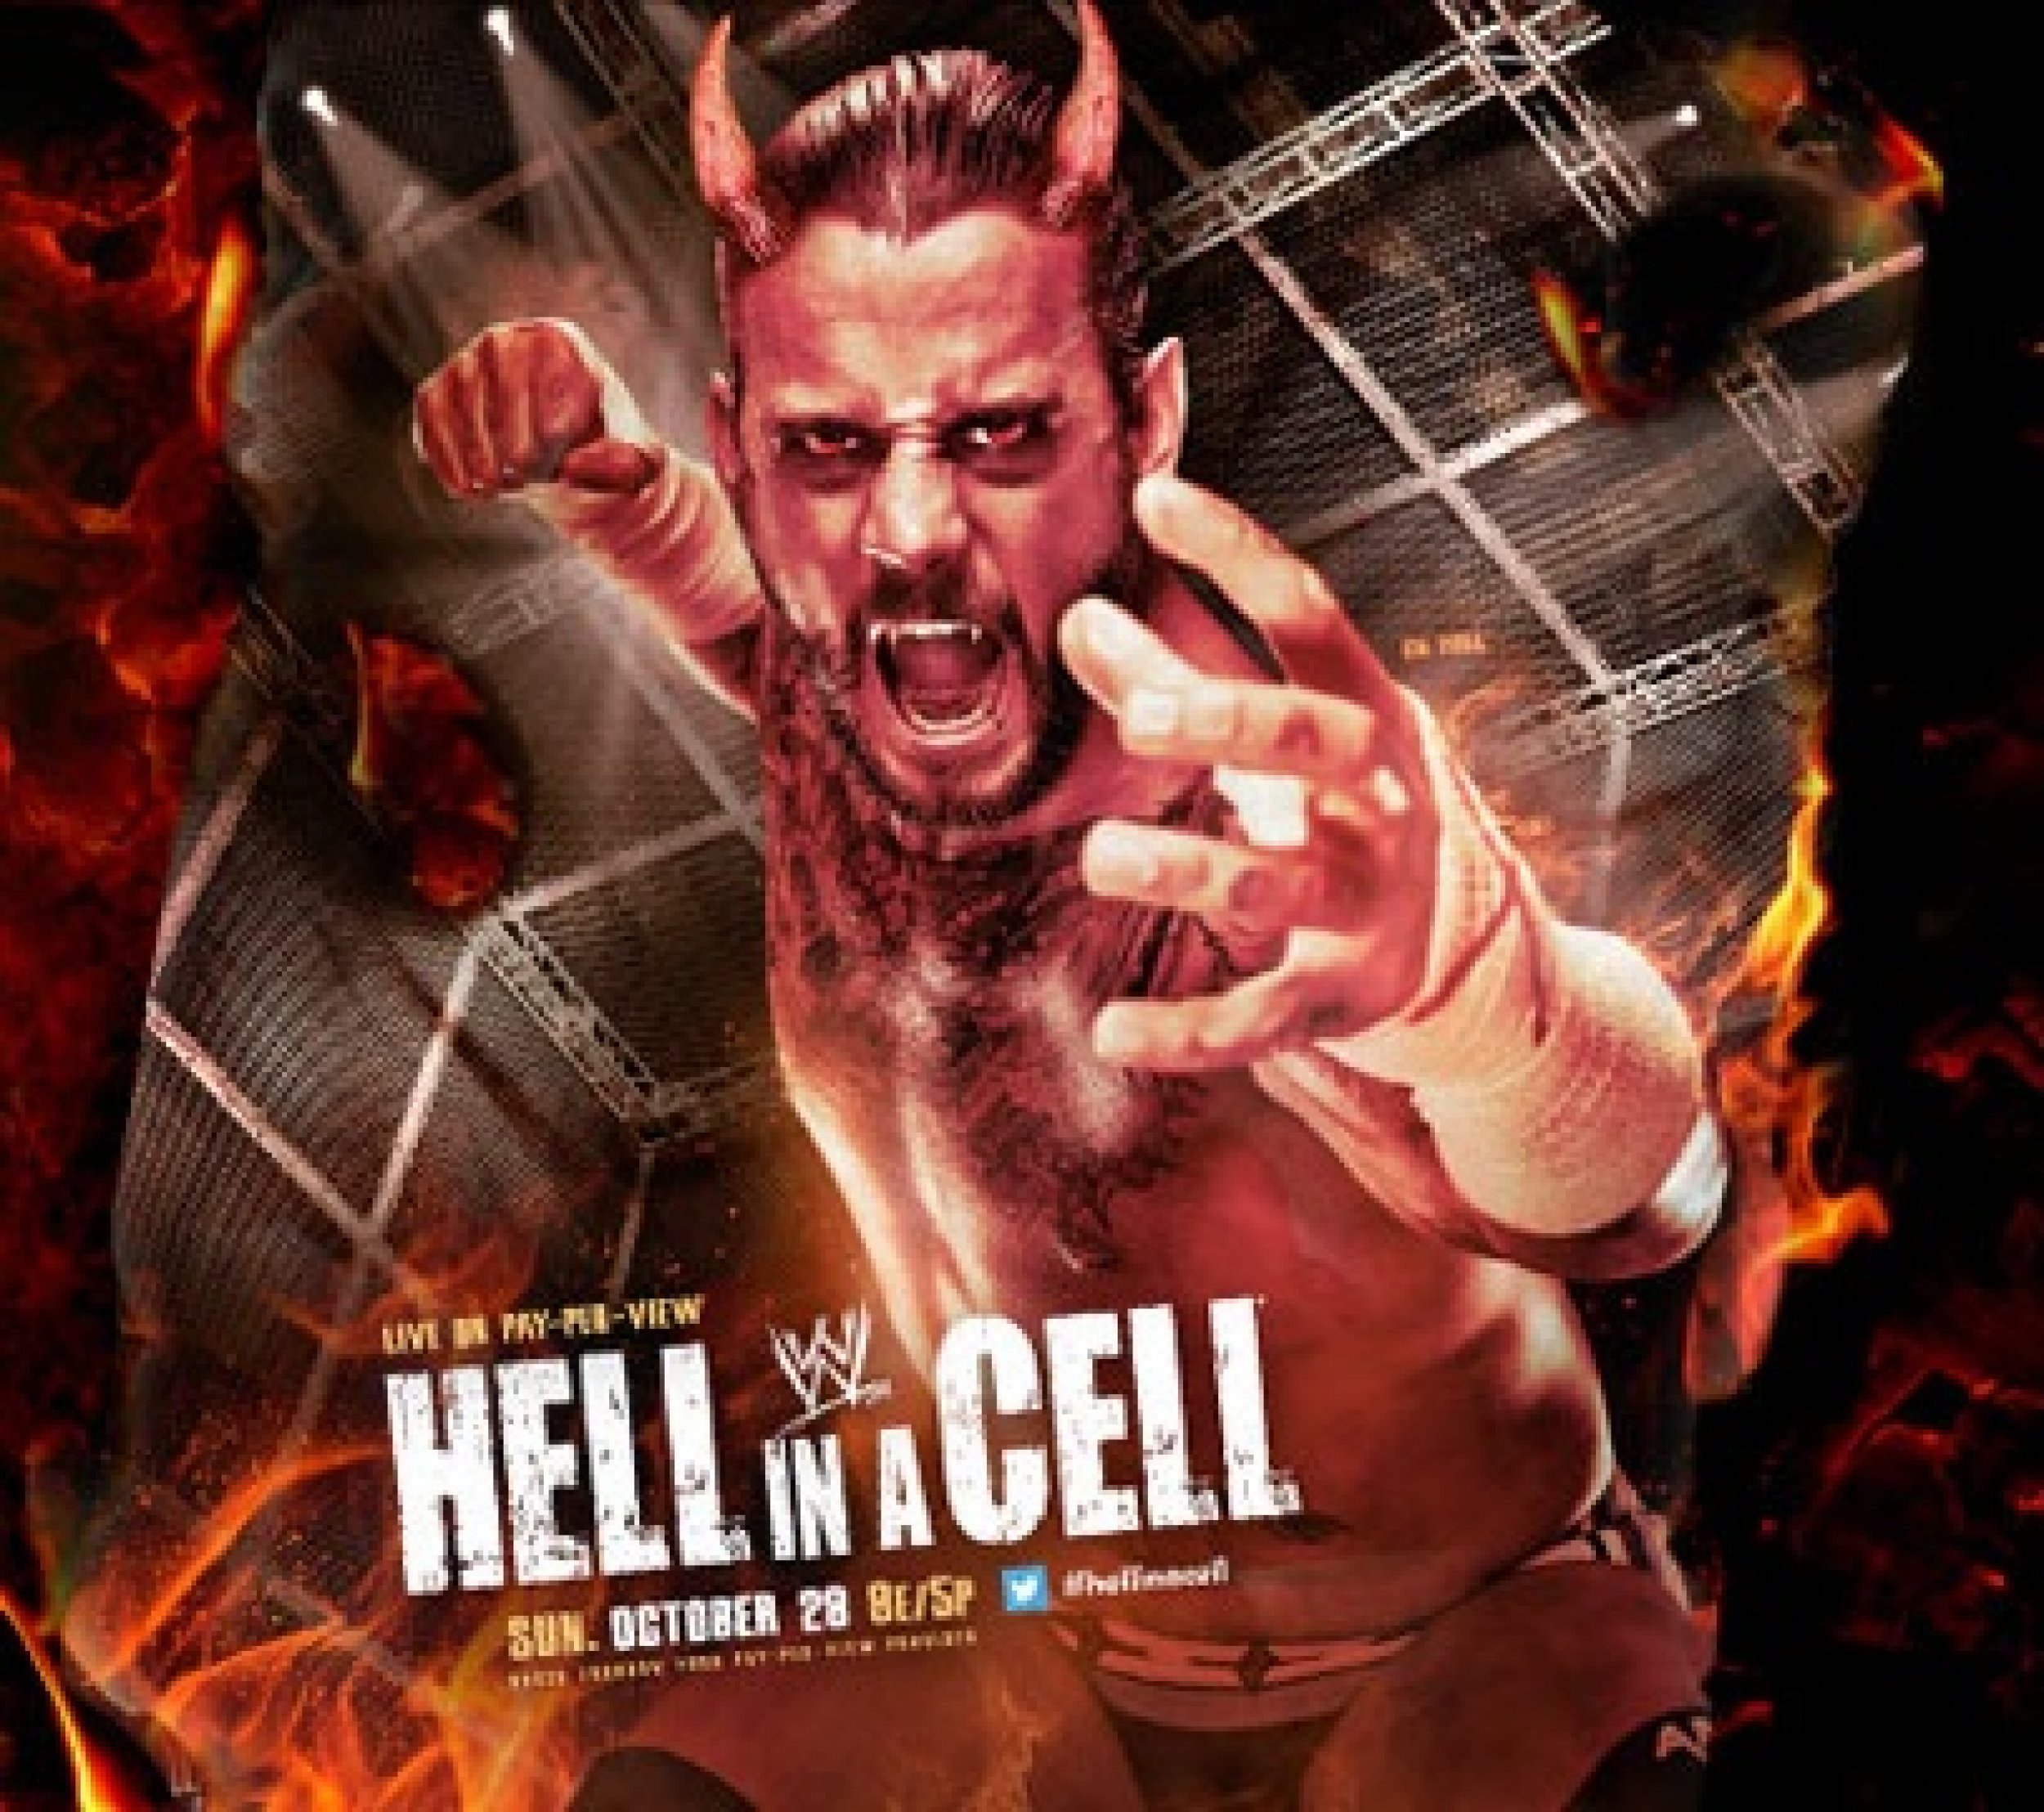 How To Watch WWE Hell In A Cell 2012 Free Live Stream, Tickets and Location, Screenings, Pay-Per-View, Streaming